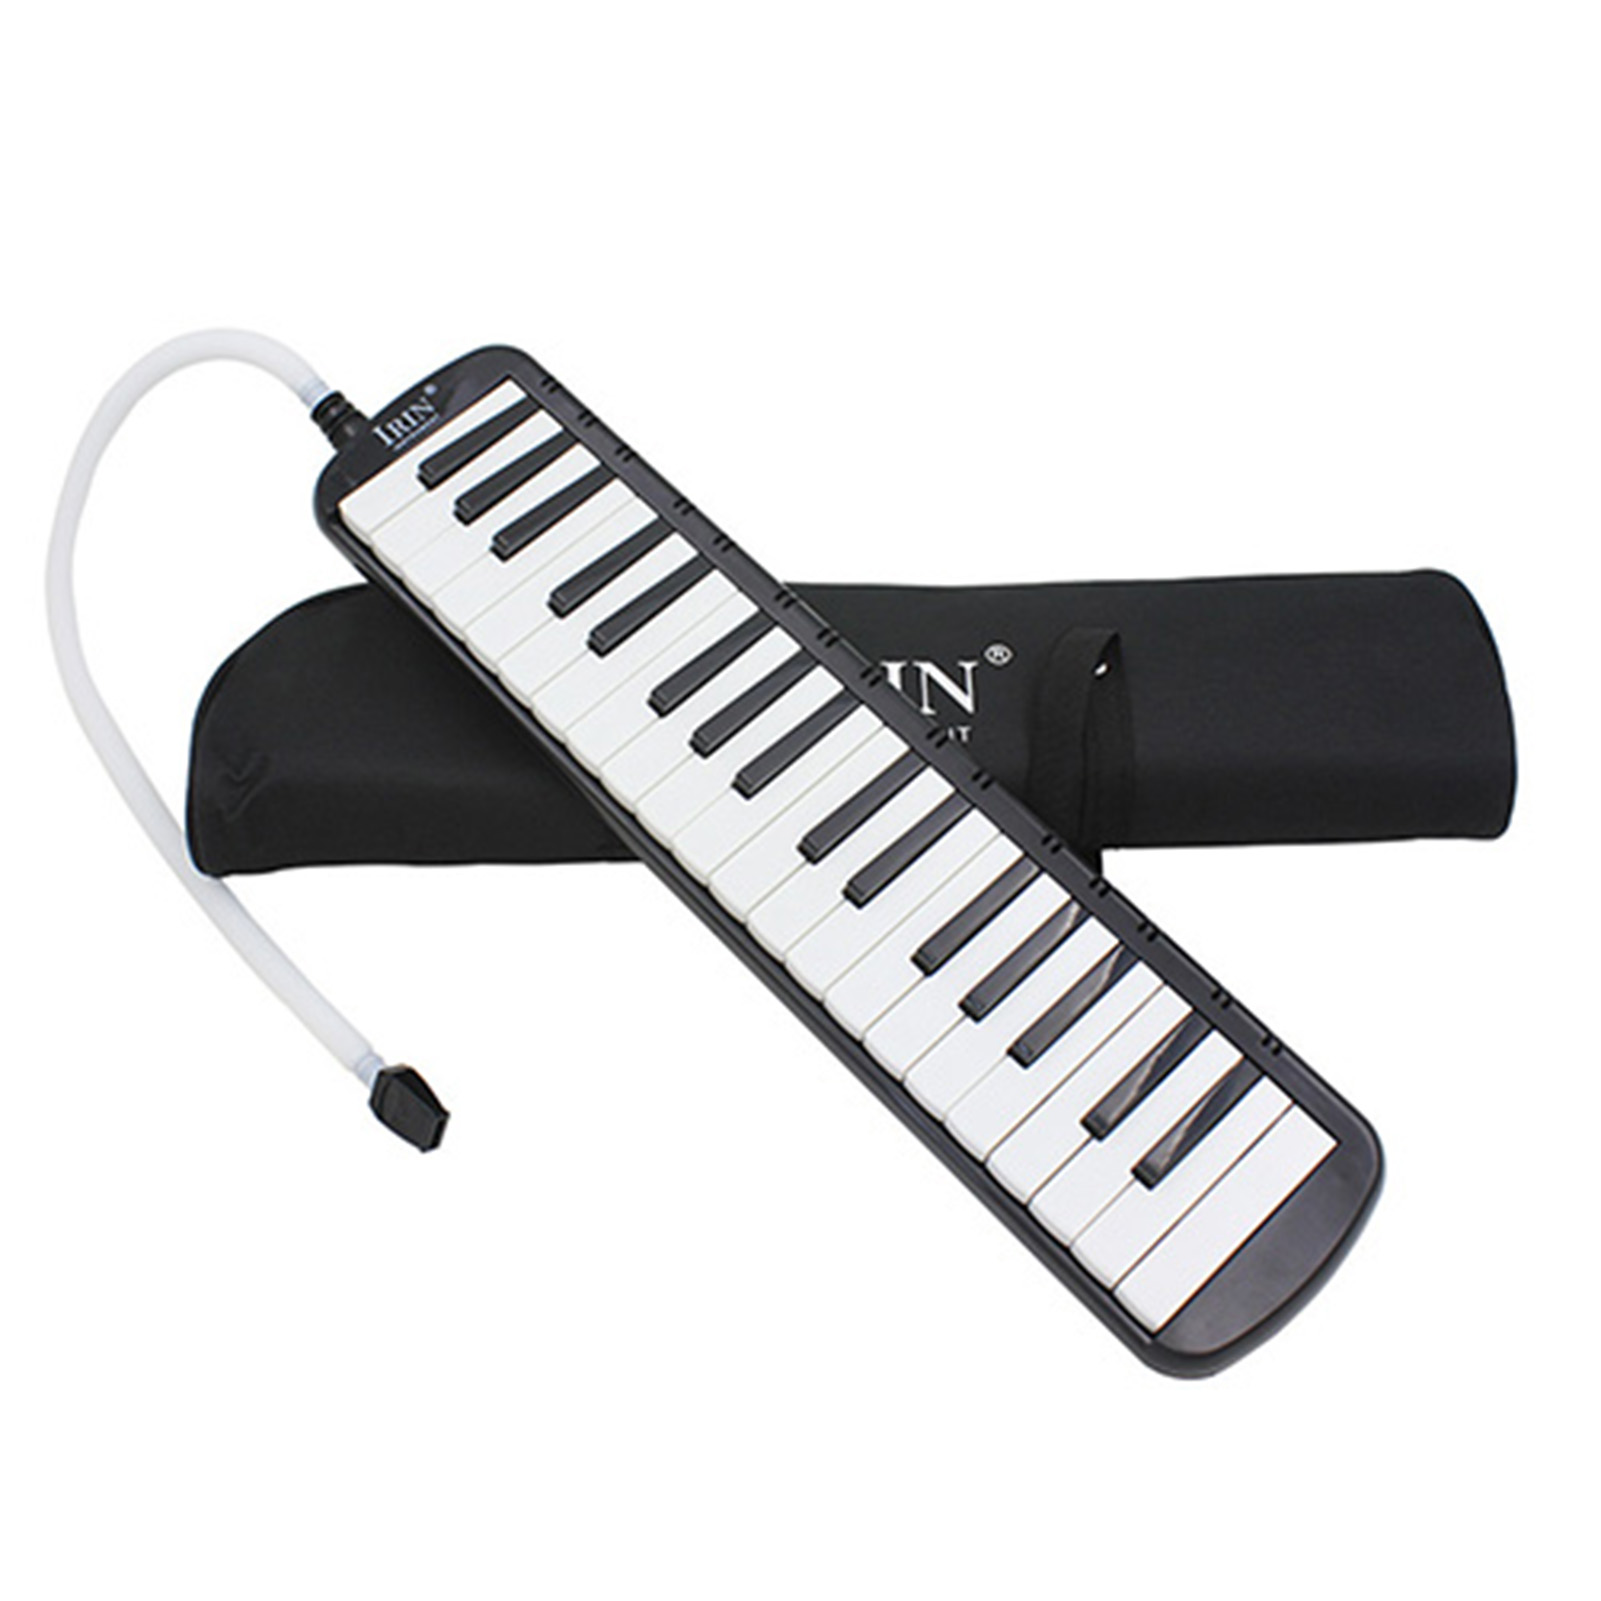 Melodica 37 Keys Tubes Mouthpiece Air Piano Keyboard Musical Instrument with Carrying Bag, Black - image 1 of 6